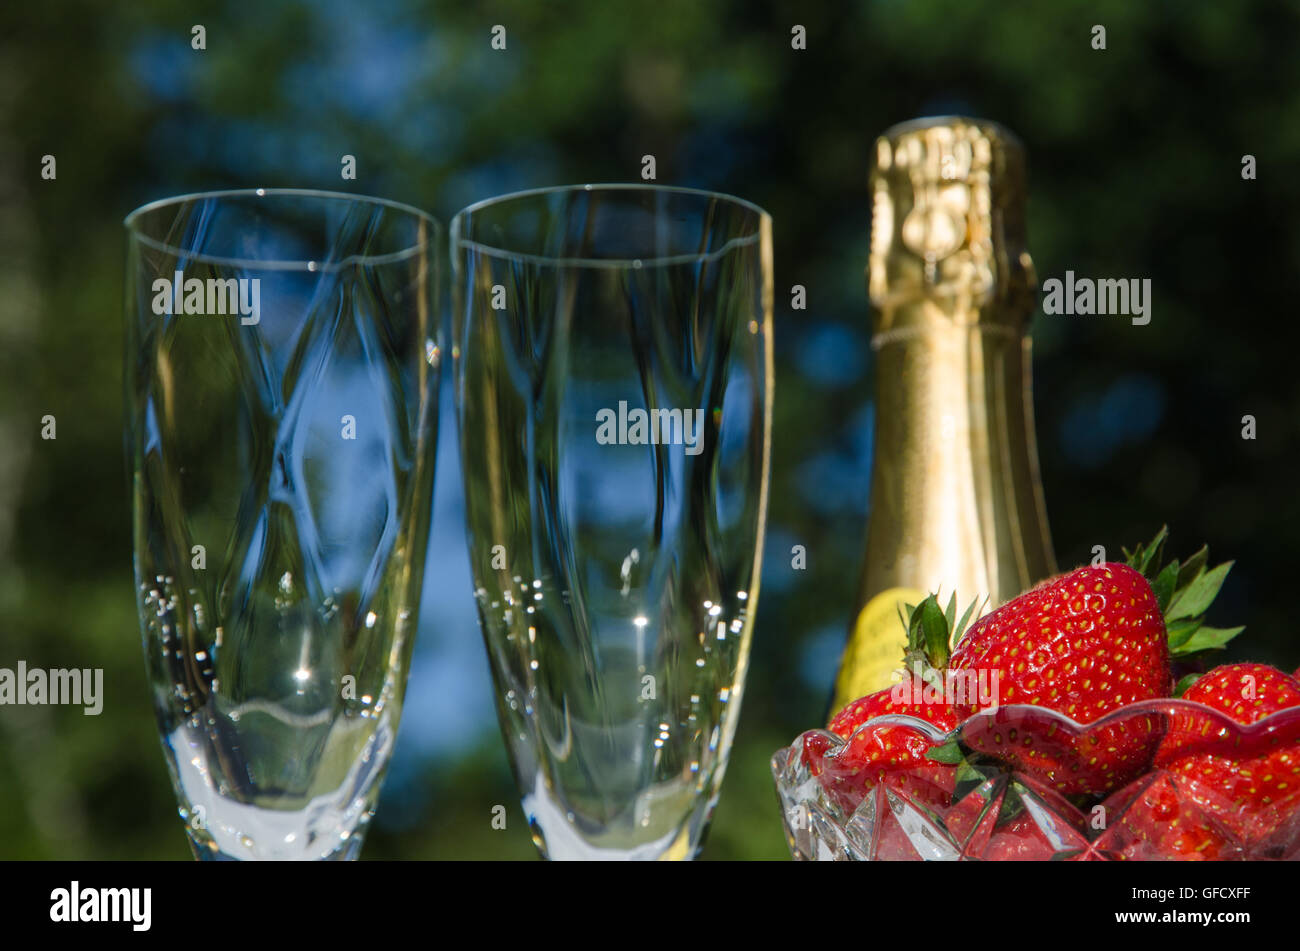 Top of champagne bottle, two glasses and a bowl of strawberries oudoors in a garden Stock Photo